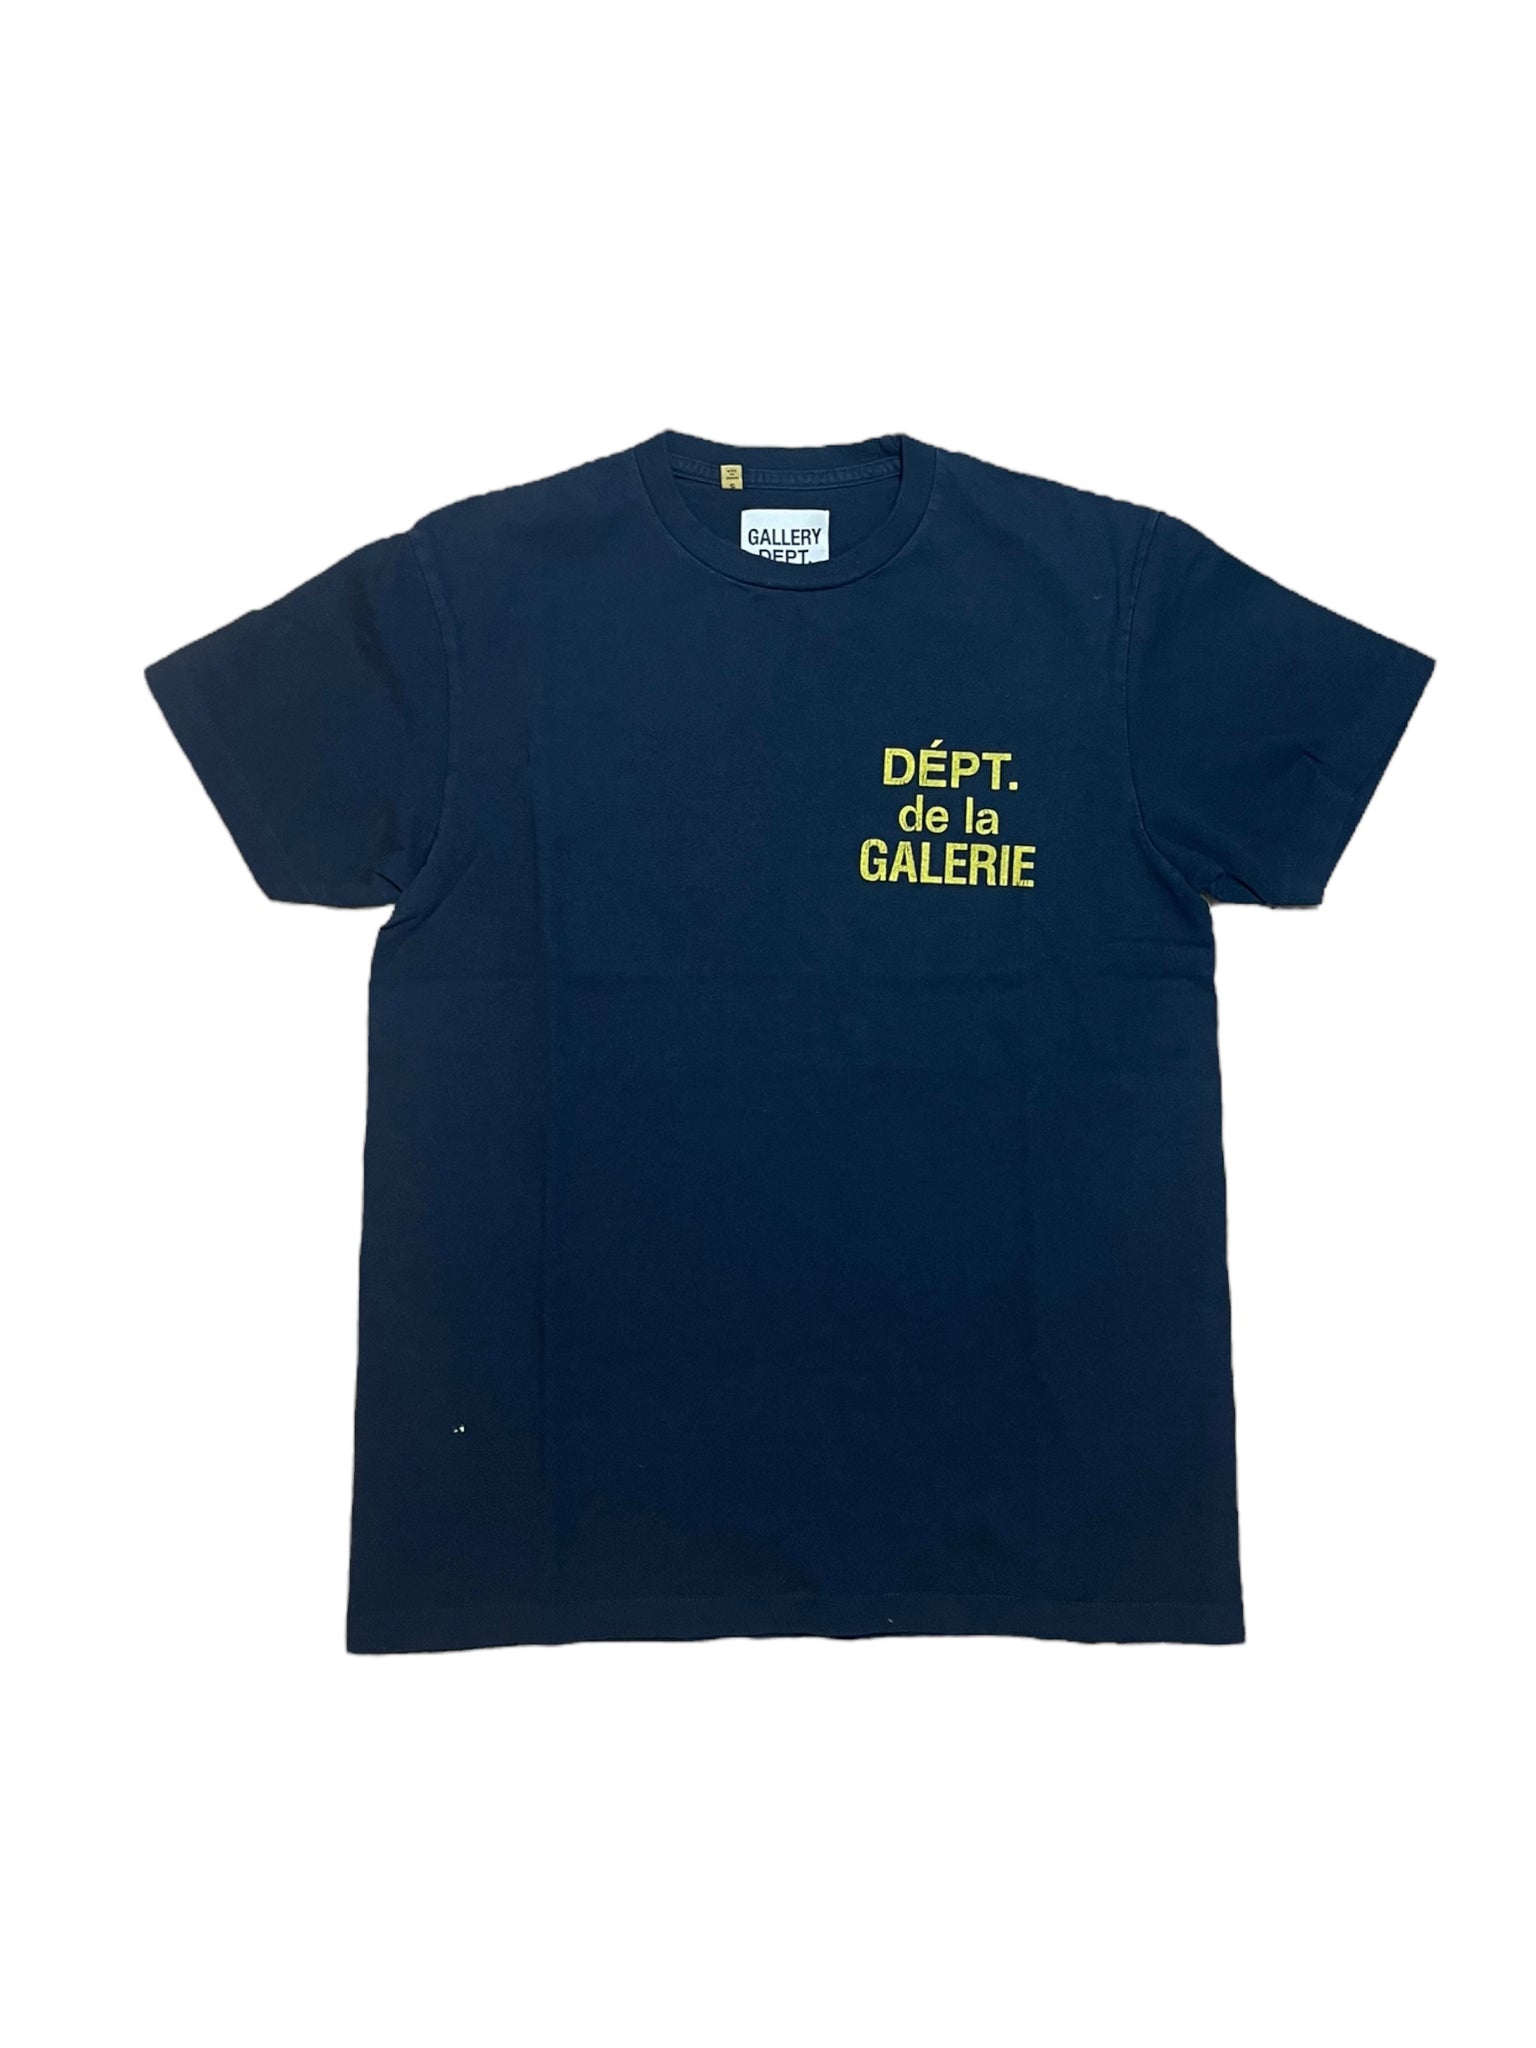 Gallery Dept. French Tee "Black/Yellow"